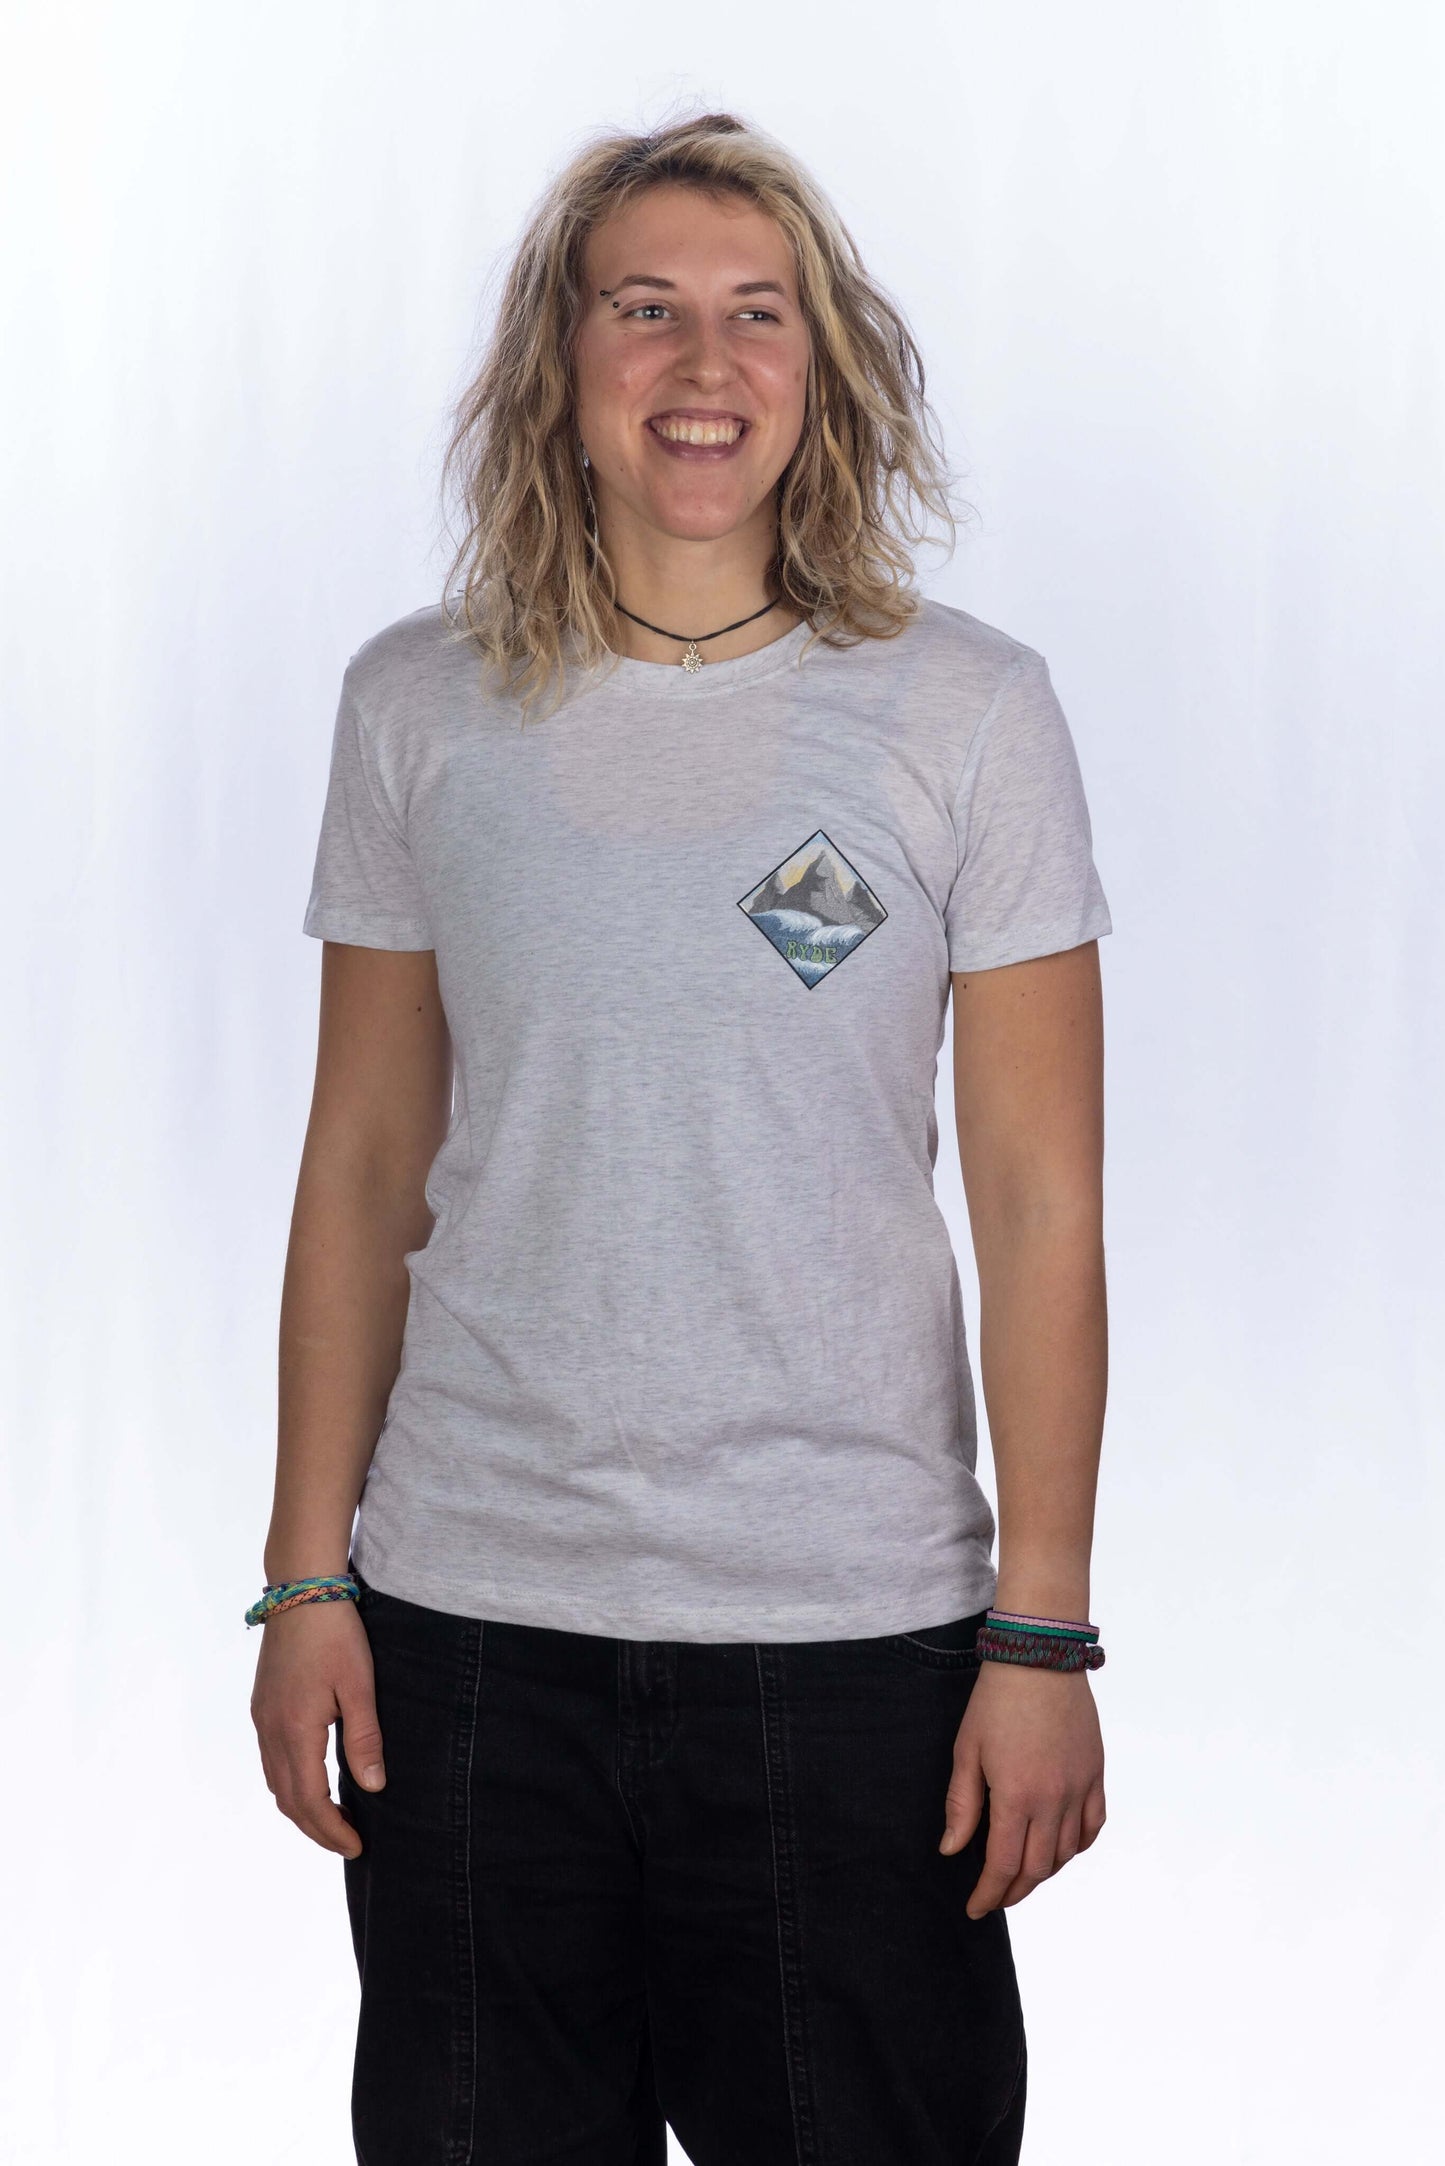 ryde 4 lyfe - women's Free Flow Fitted T-Shirt - heather white - front